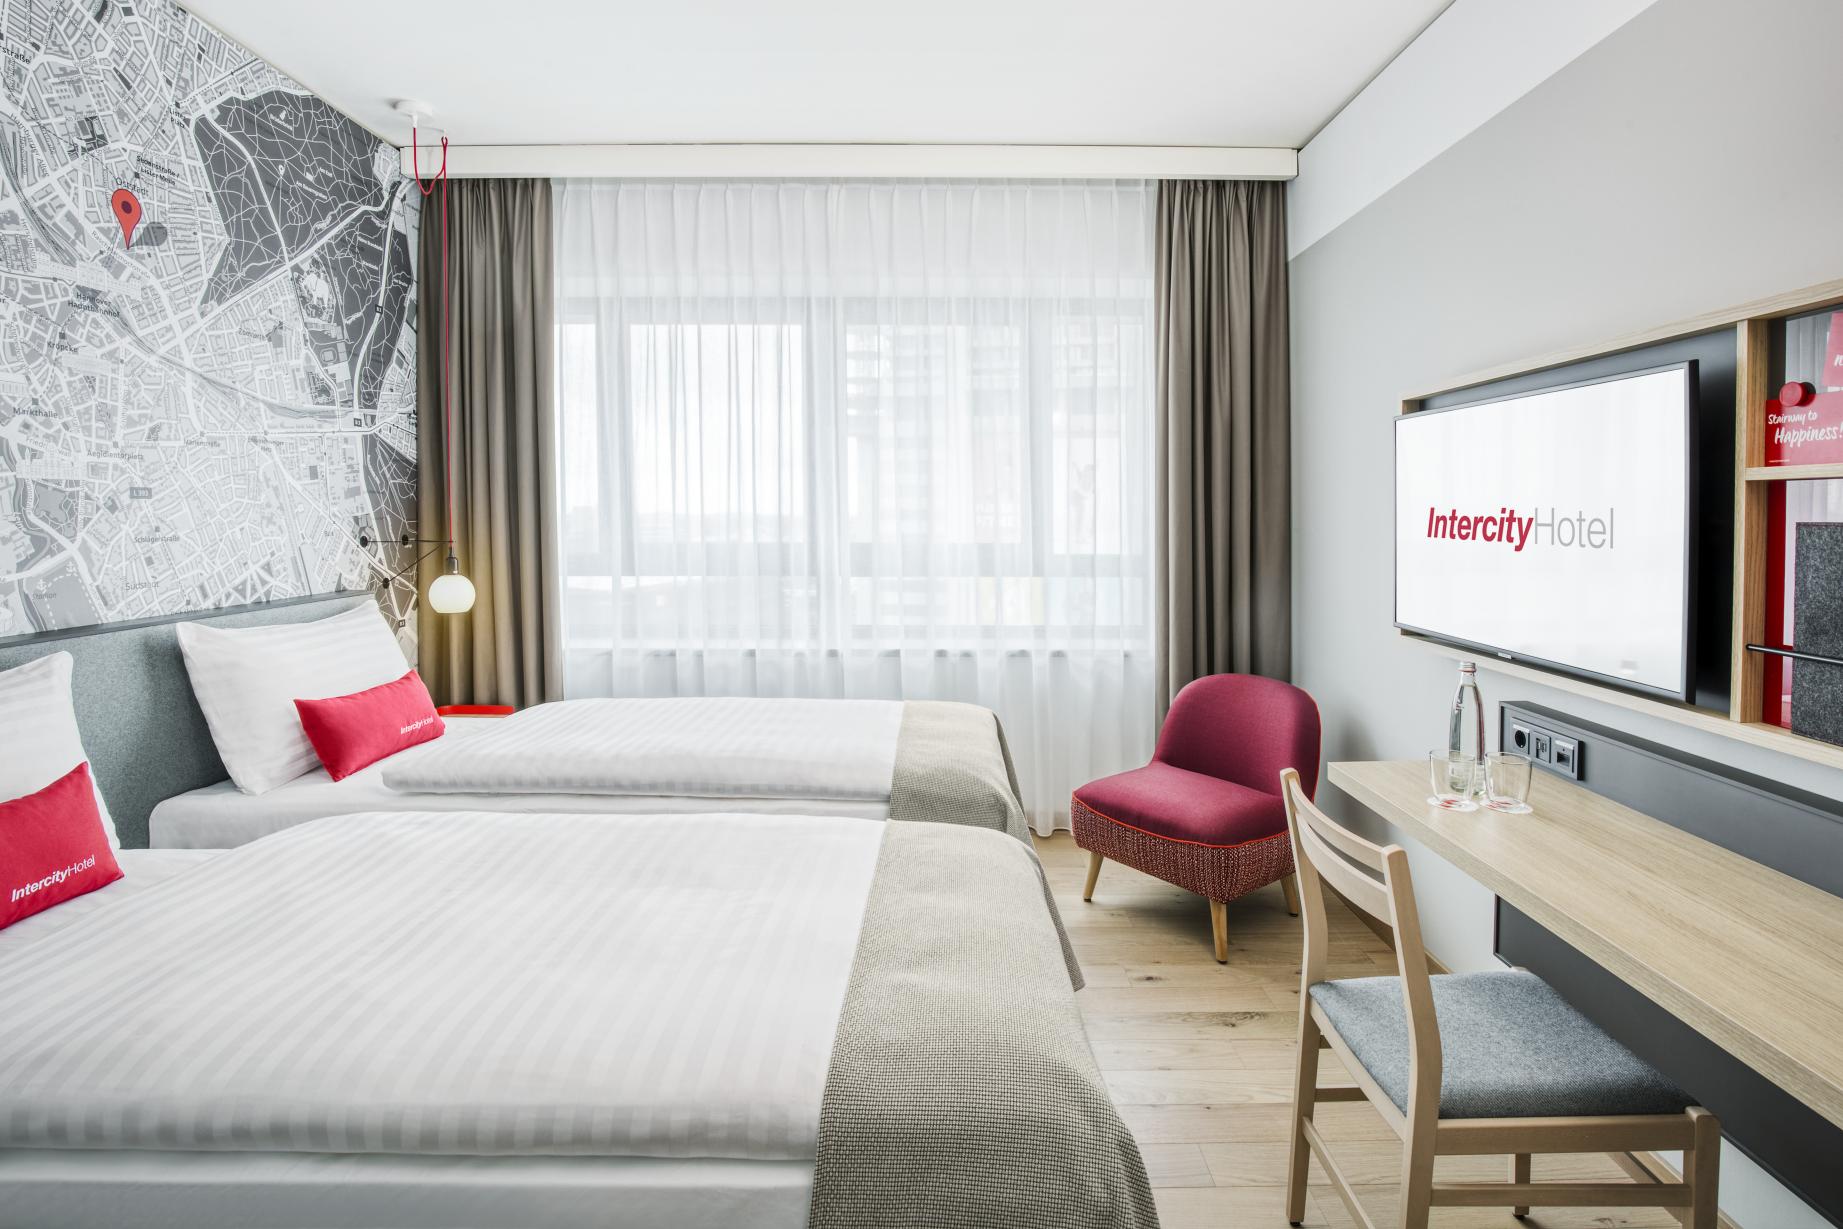 IntercityHotel Hannover Hauptbahnhof Ost <br/>67.14 ew <br/> <a href='http://vakantieoplossing.nl/outpage/?id=8b68f93b6c87c2a5e947a0dfcc440142' target='_blank'>View Details</a>